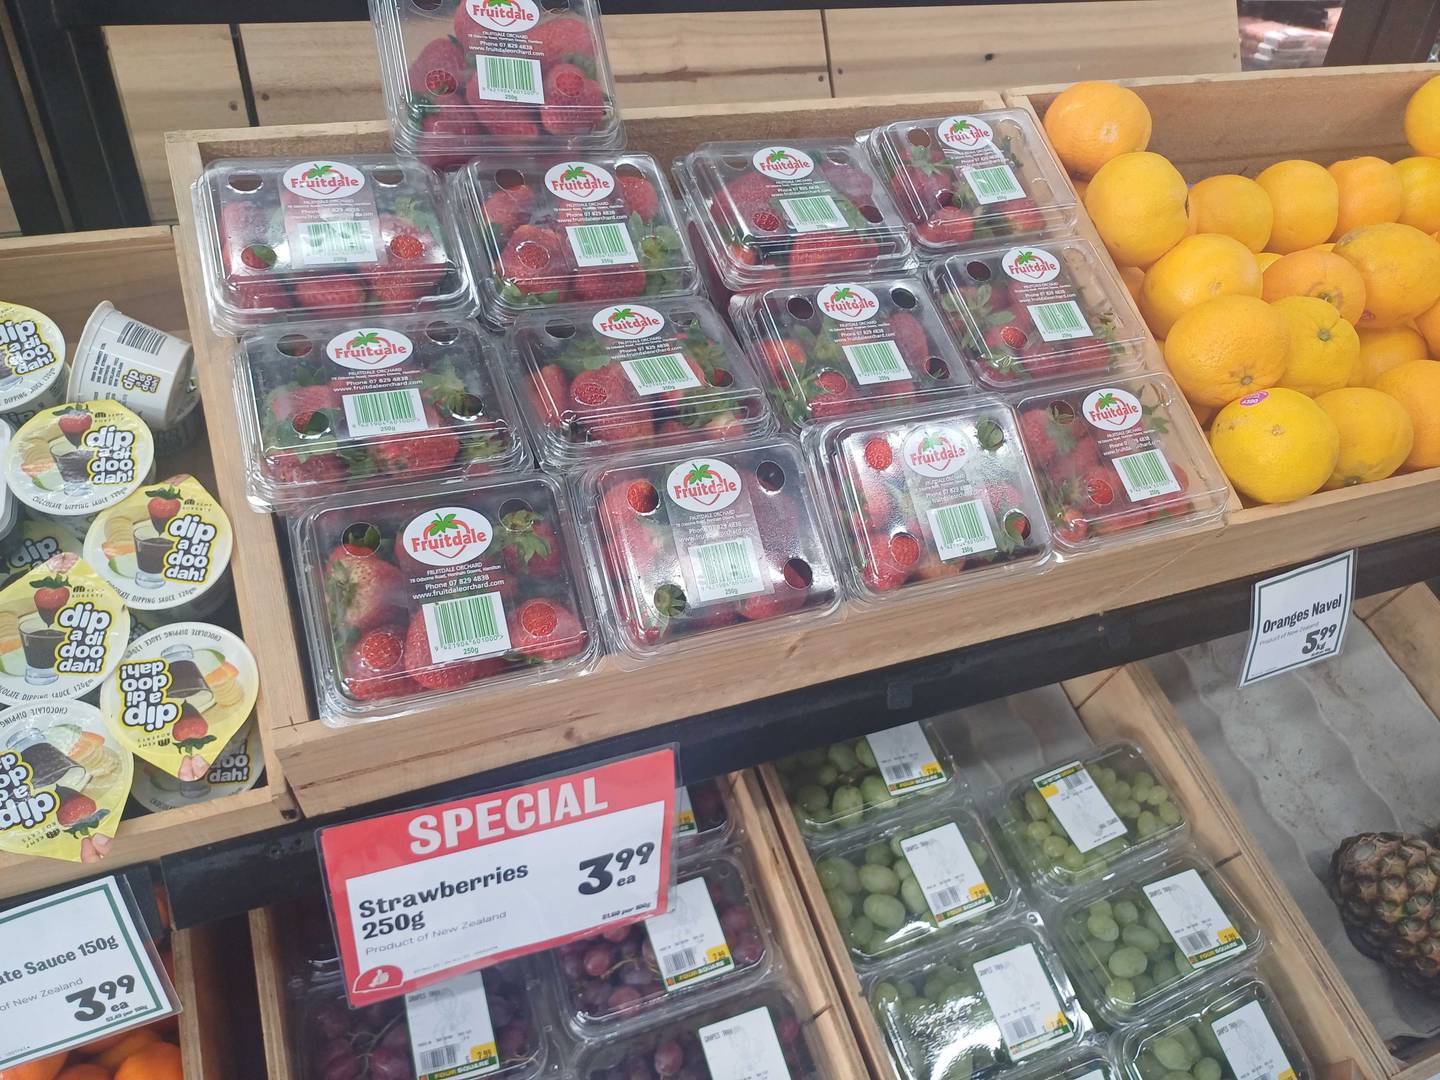 250g of strawberries on sale for $3.99 at Four Square. Photo / NZ Herald